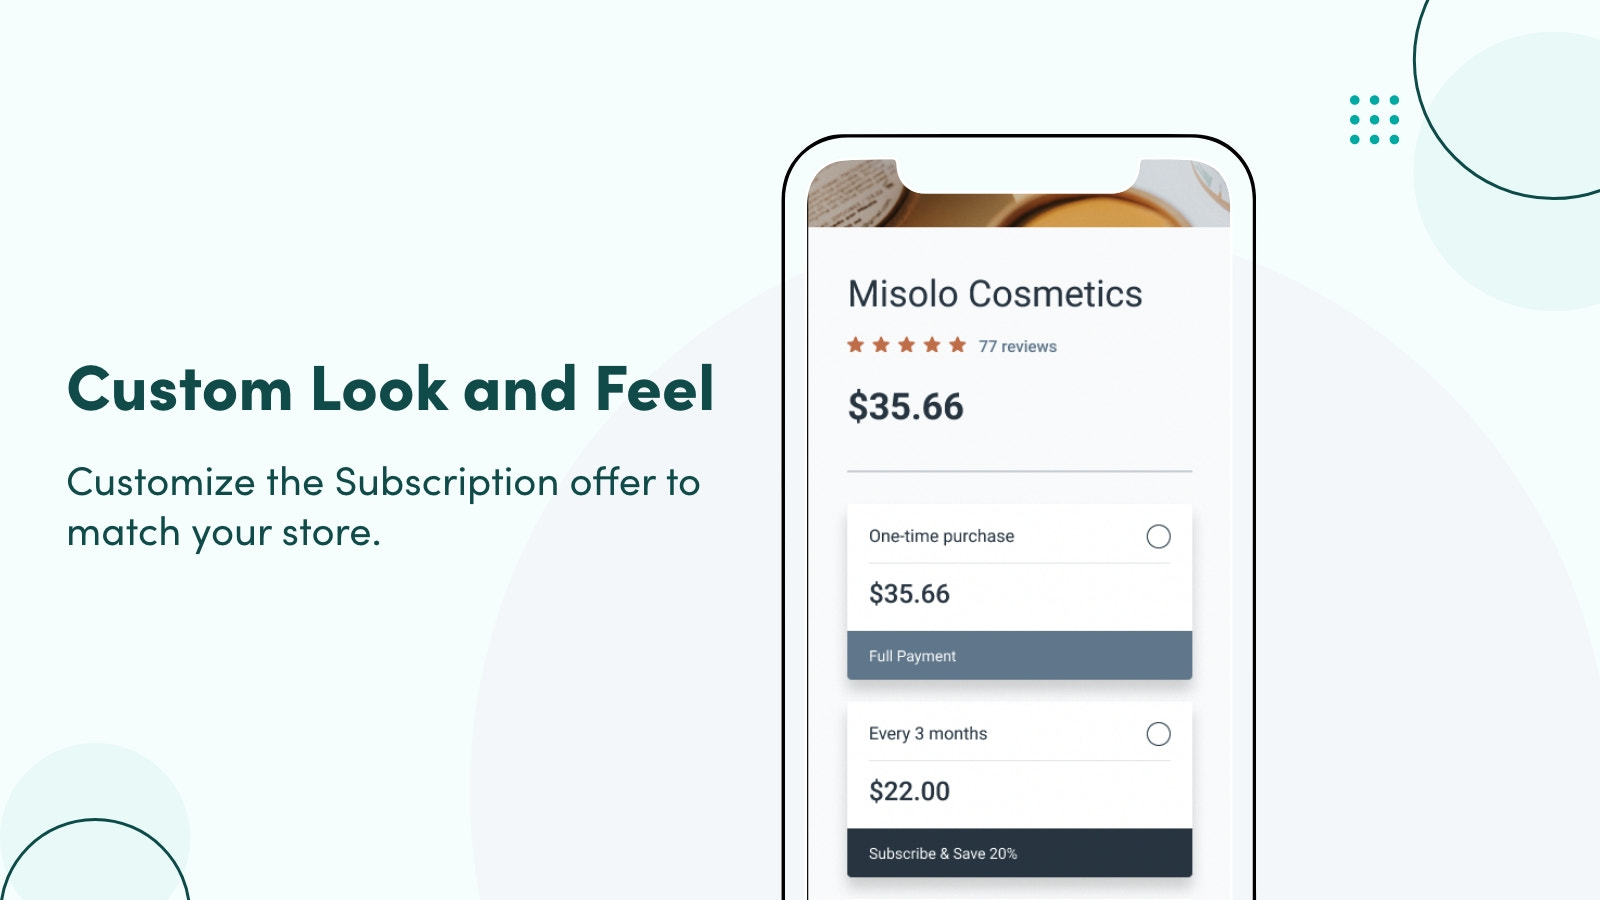 Customize the Subscription offer to match your store.